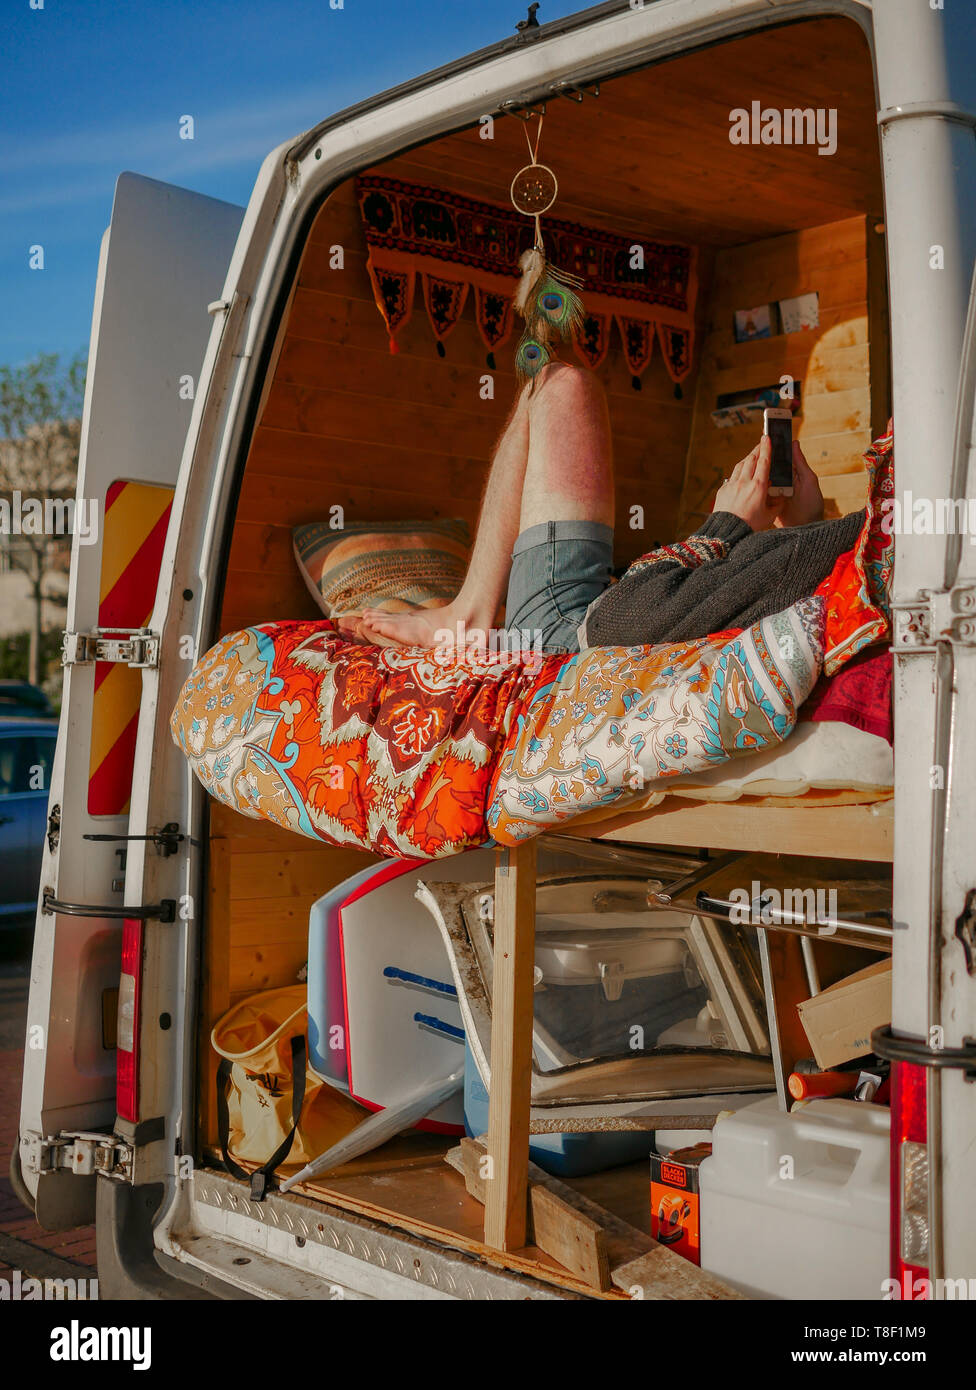 Alternative living in the City - A man sits in his converted home van in the centre of Cardiff Bay Stock Photo